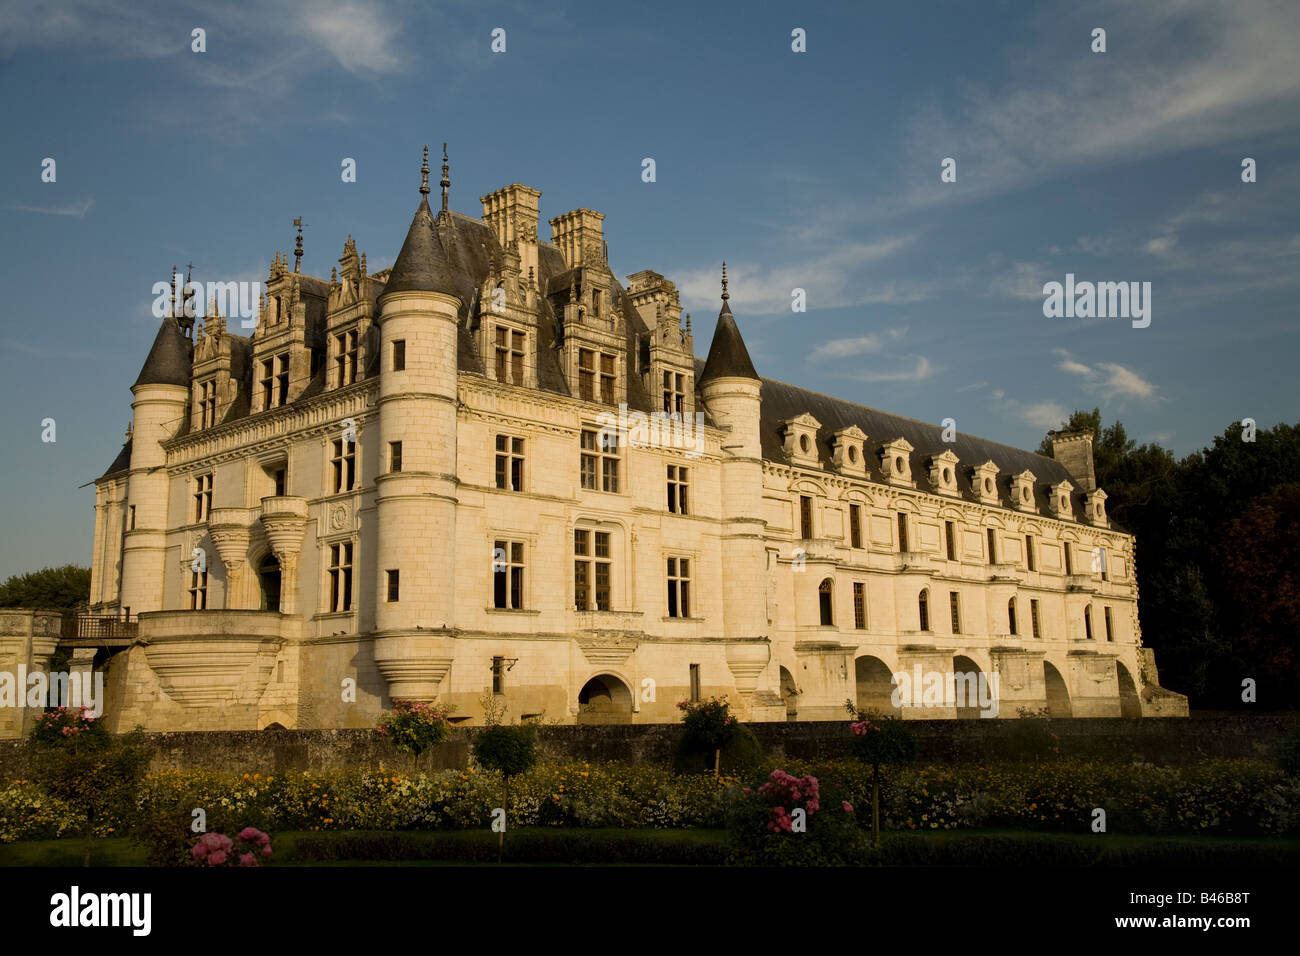 Western face of Chateau de Chenonceau at sunset, Loire Valley, France, seen from Catherine de Medicis's Garden. Stock Photo